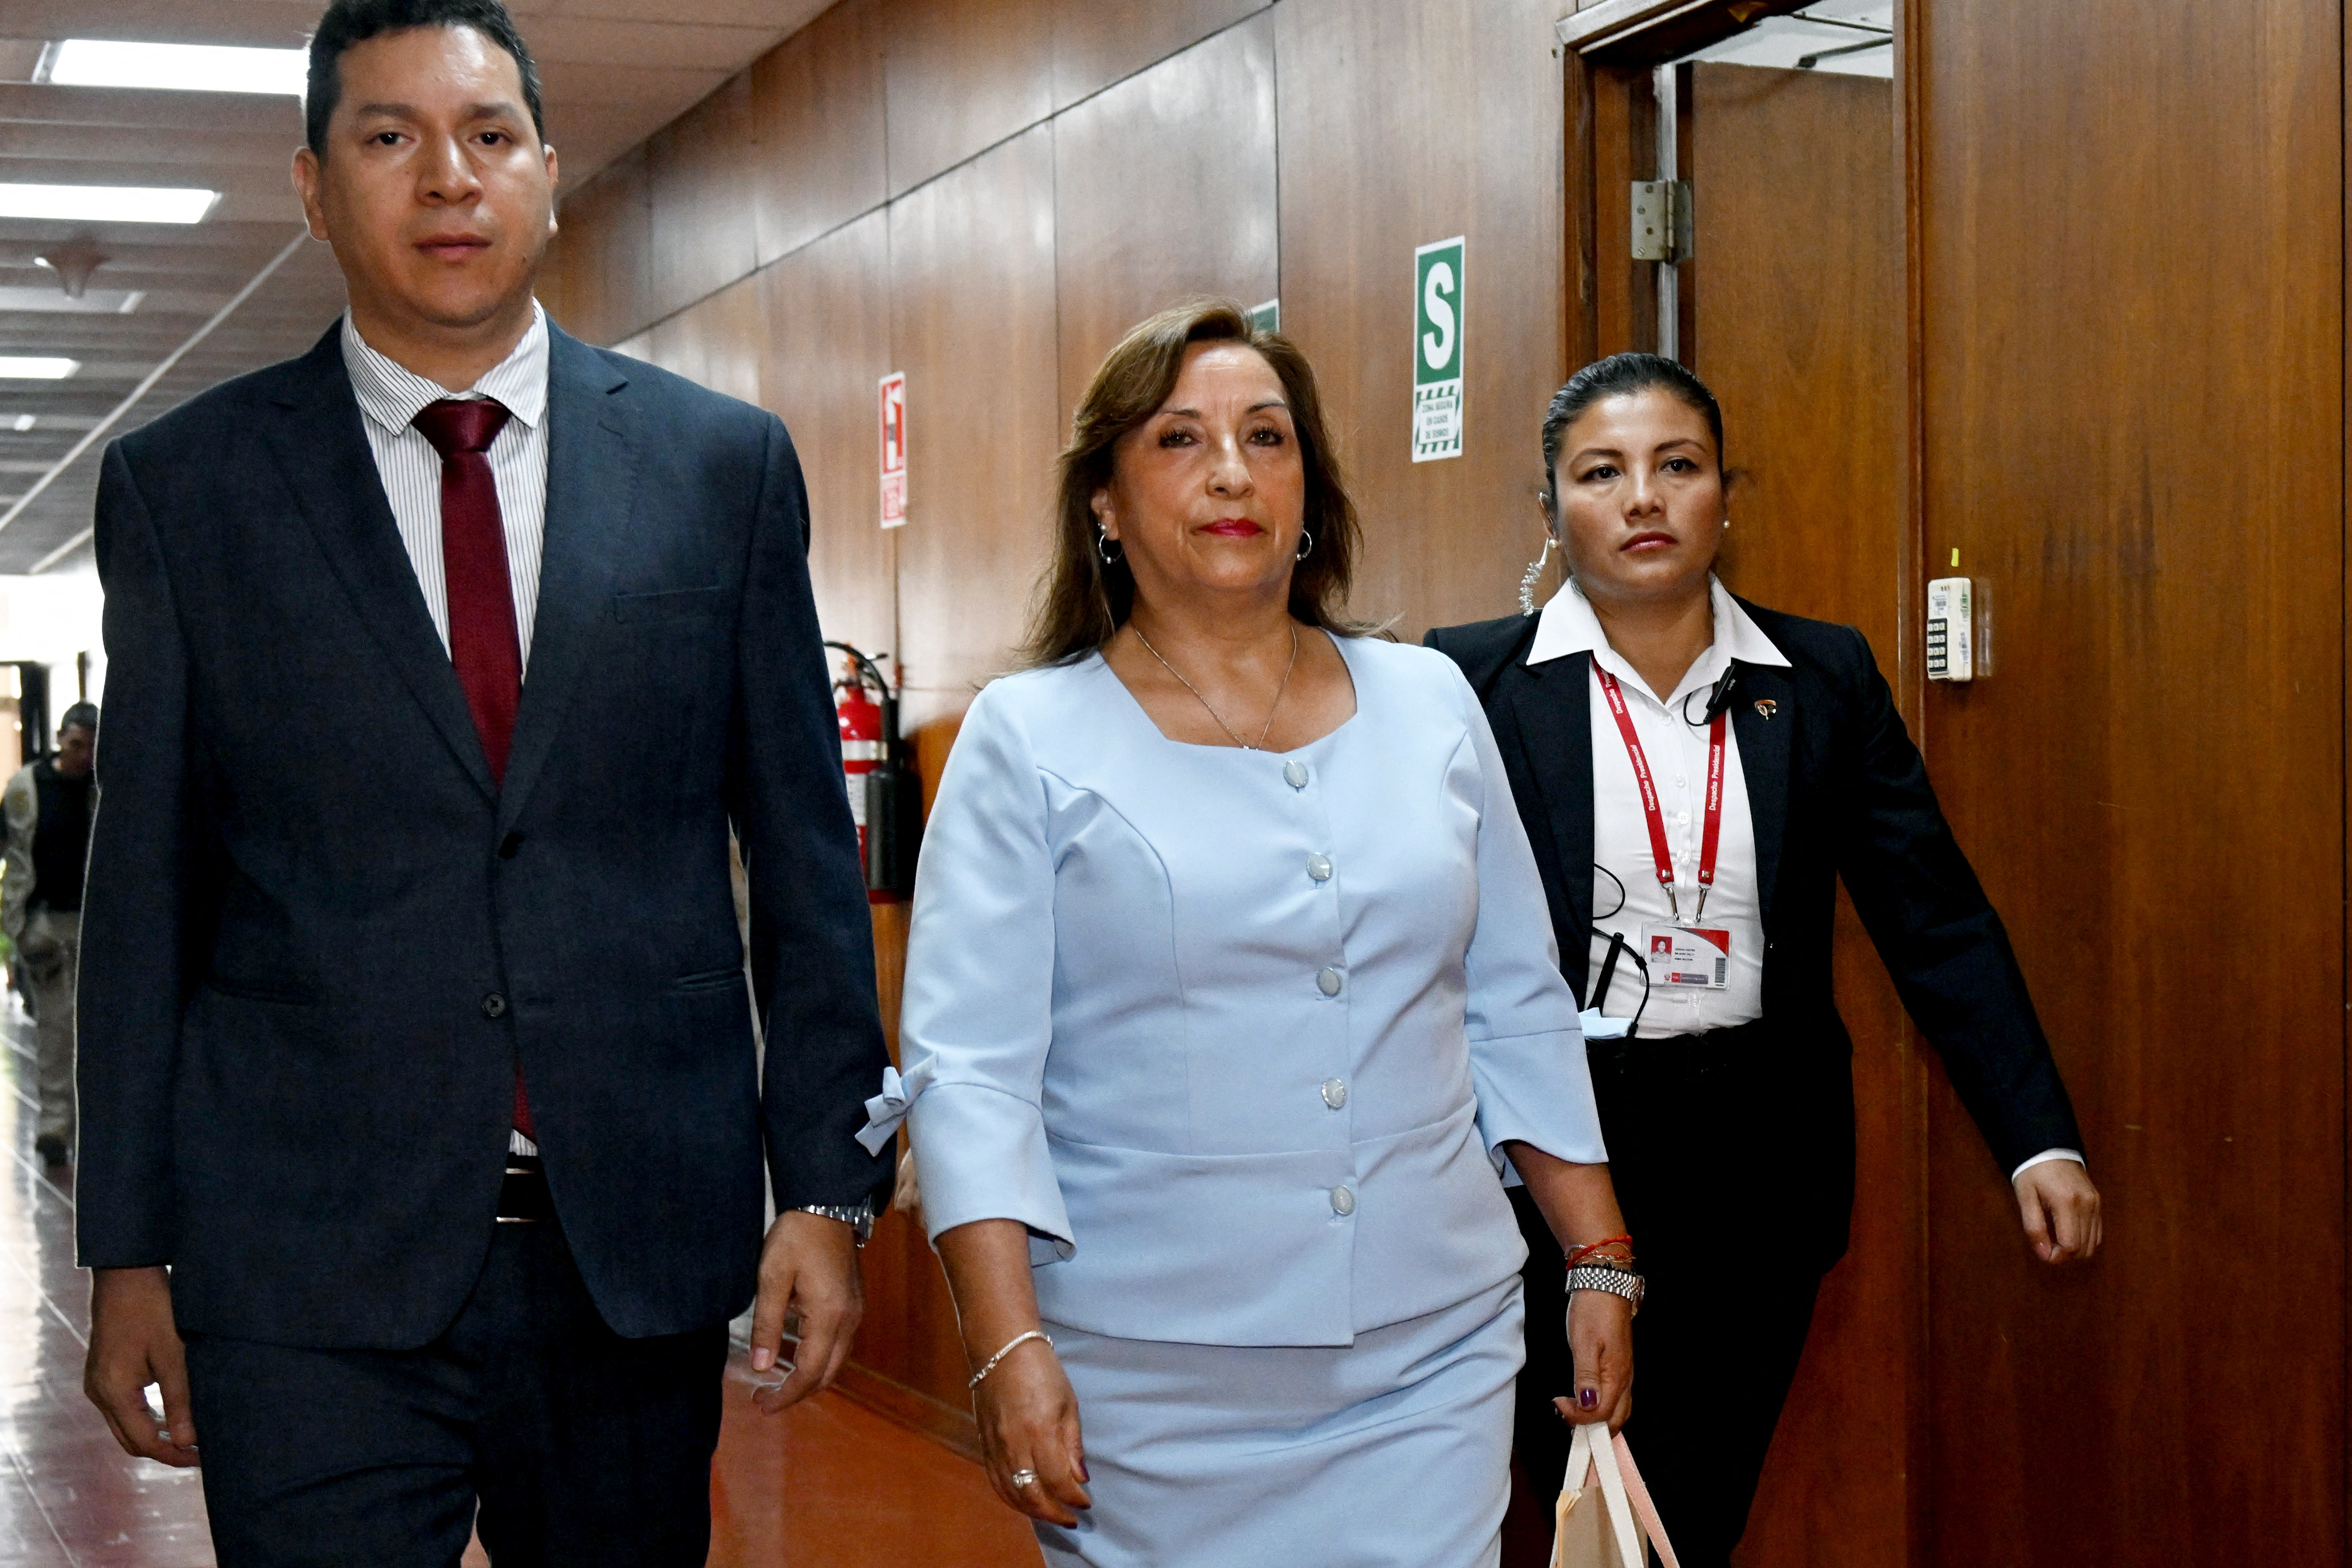 Peru's President Dina Boluarte arrives at the prosecutor's office, in Lima, Peru March 7, 2023. Peru National Prosecutor's Office/Handout via REUTERS ATTENTION EDITORS - THIS IMAGE HAS BEEN SUPPLIED BY A THIRD PARTY. MANDATORY CREDIT. NO RESALES. NO ARCHIVES